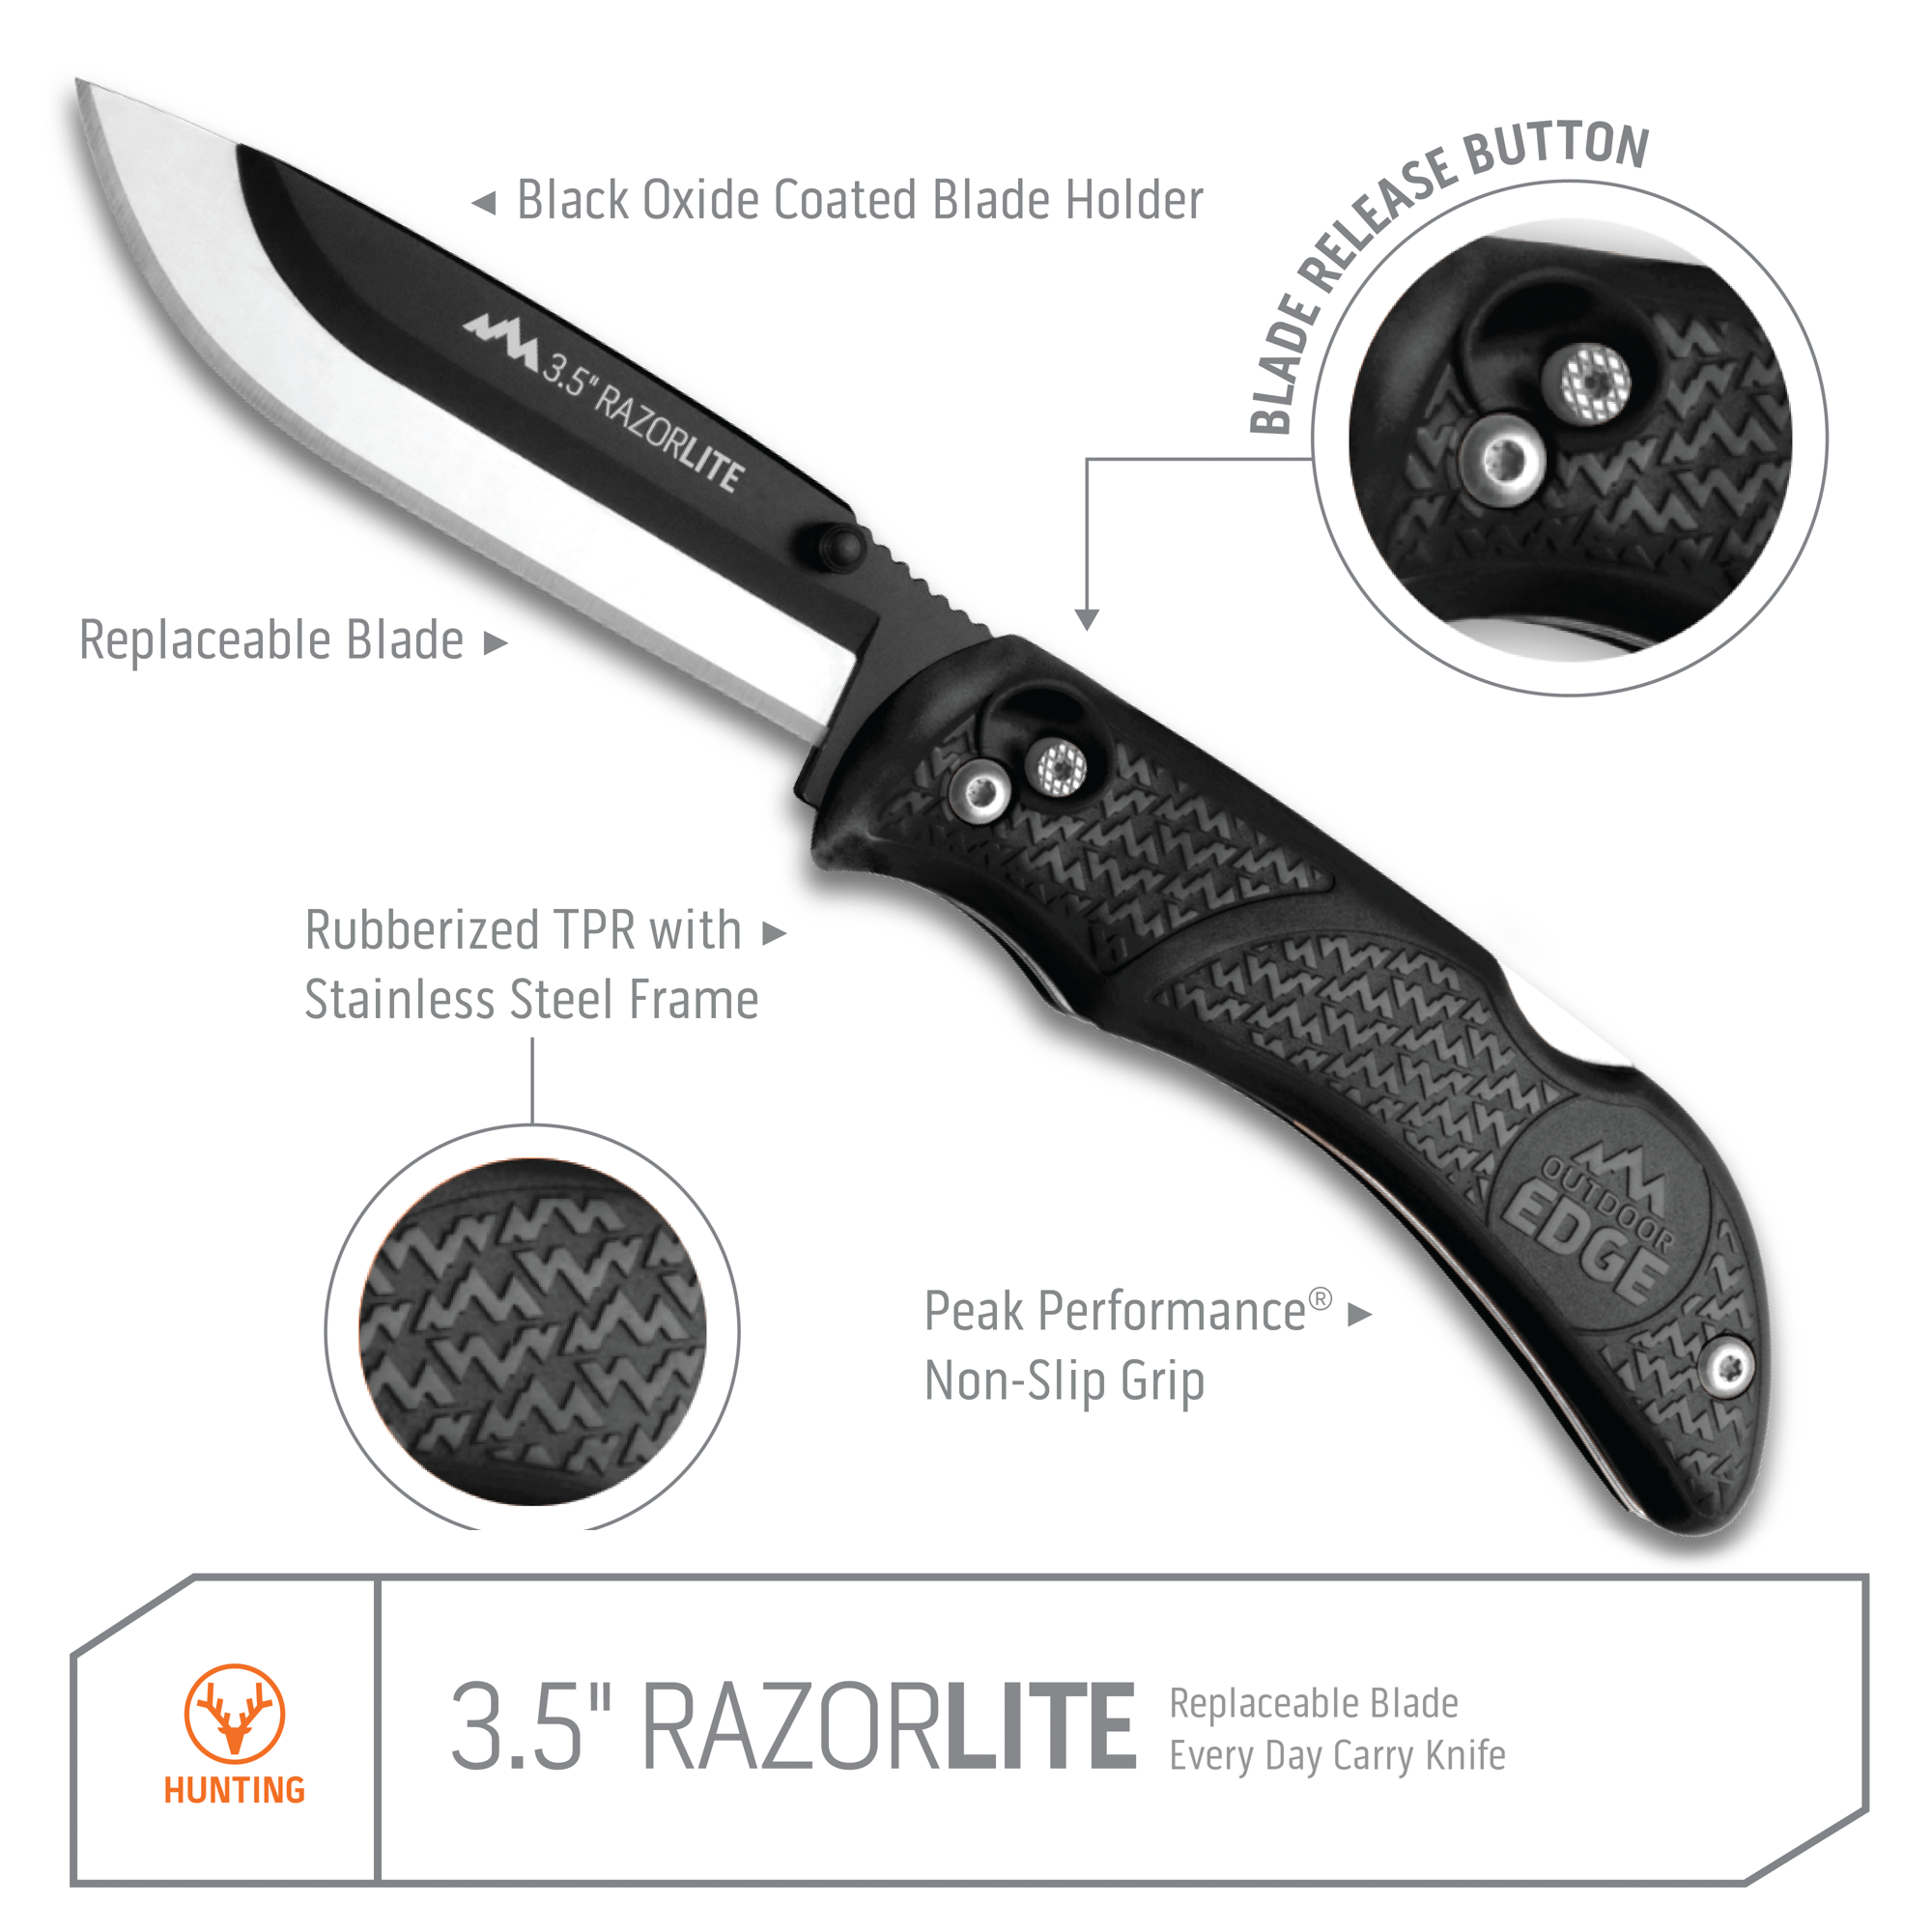 Outdoor Edge Black RazorLite Razor Blade Knife Product Photo with callouts about blade and grip